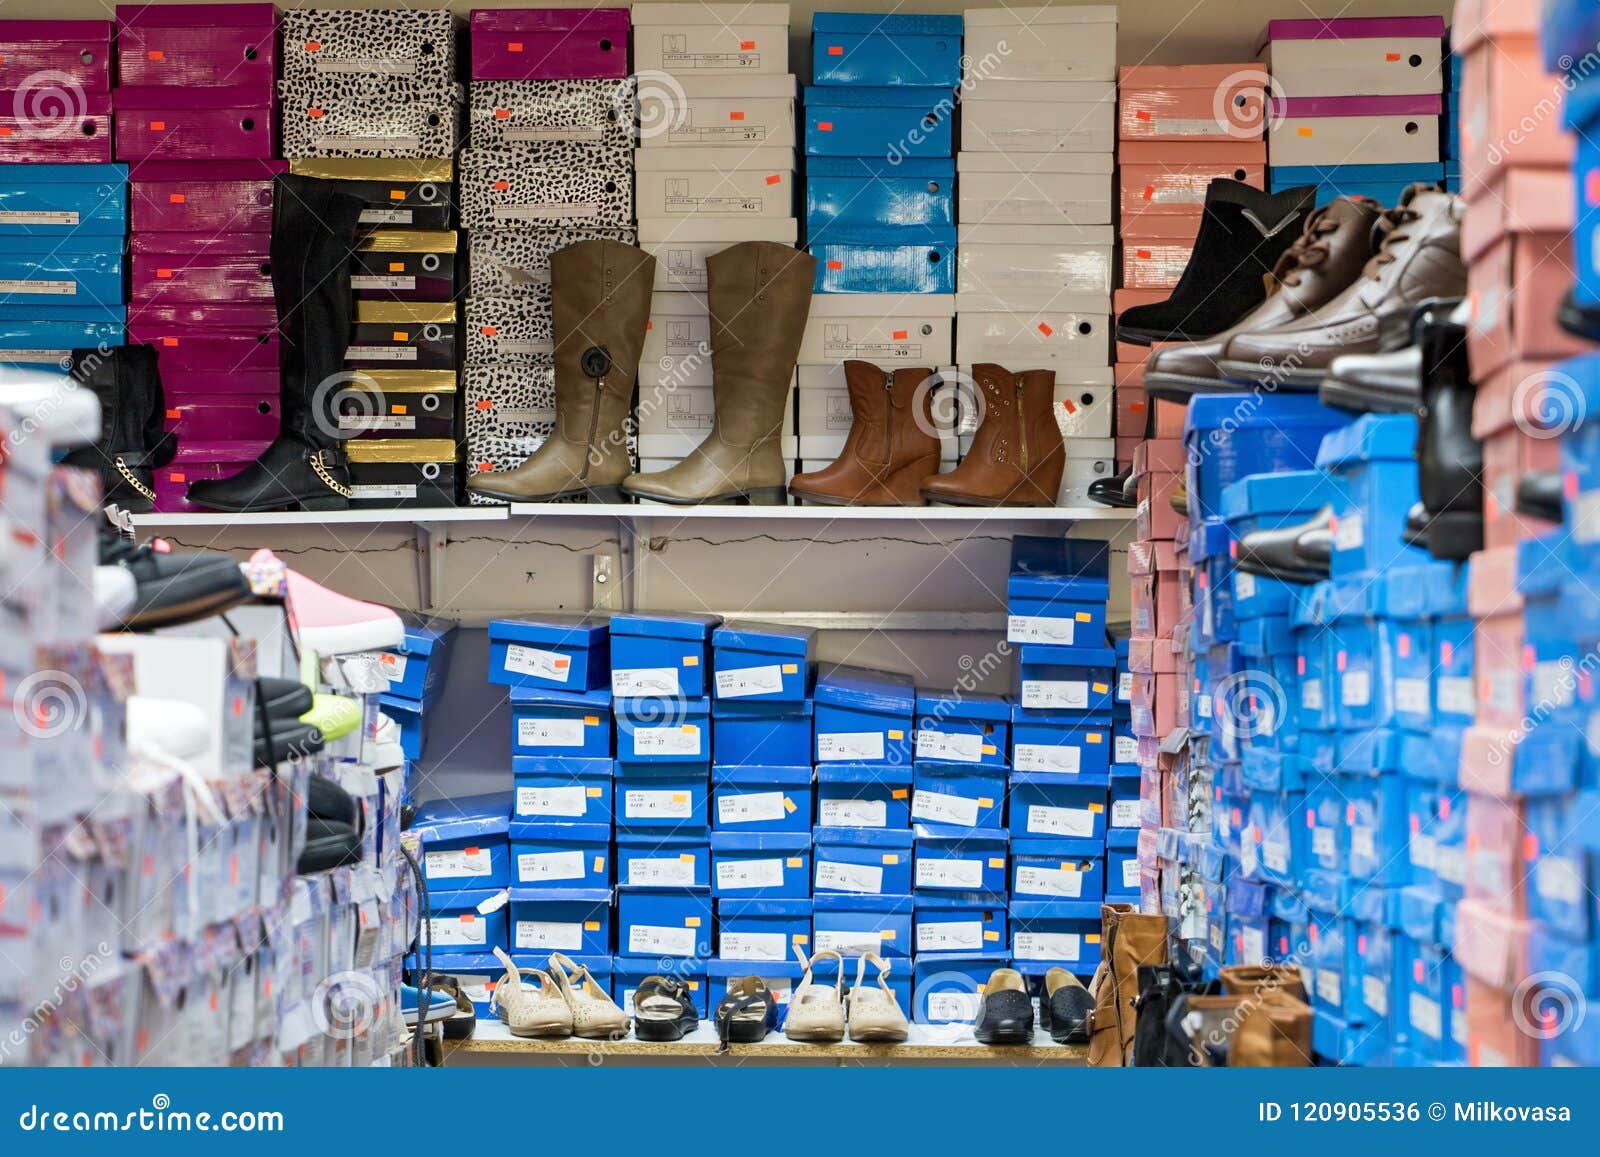 Shoes with Boxes on the Shelves in the Shop Stock Photo - Image of line ...